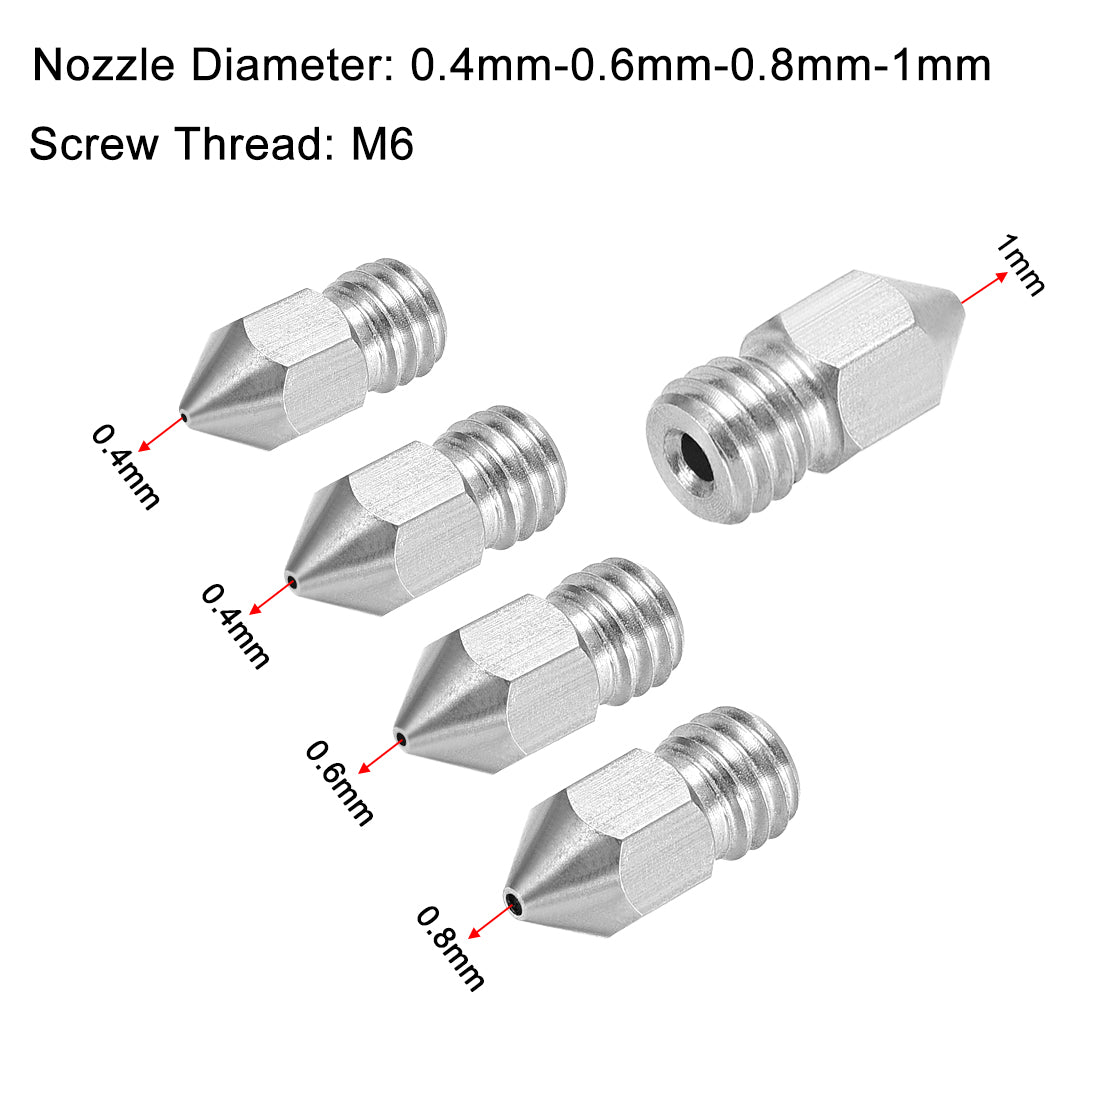 uxcell Uxcell 3D Printer Nozzle Fit for MK8,for 1.75mm Filament Stainless Steel,0.4mm - 1mm Total 5pcs